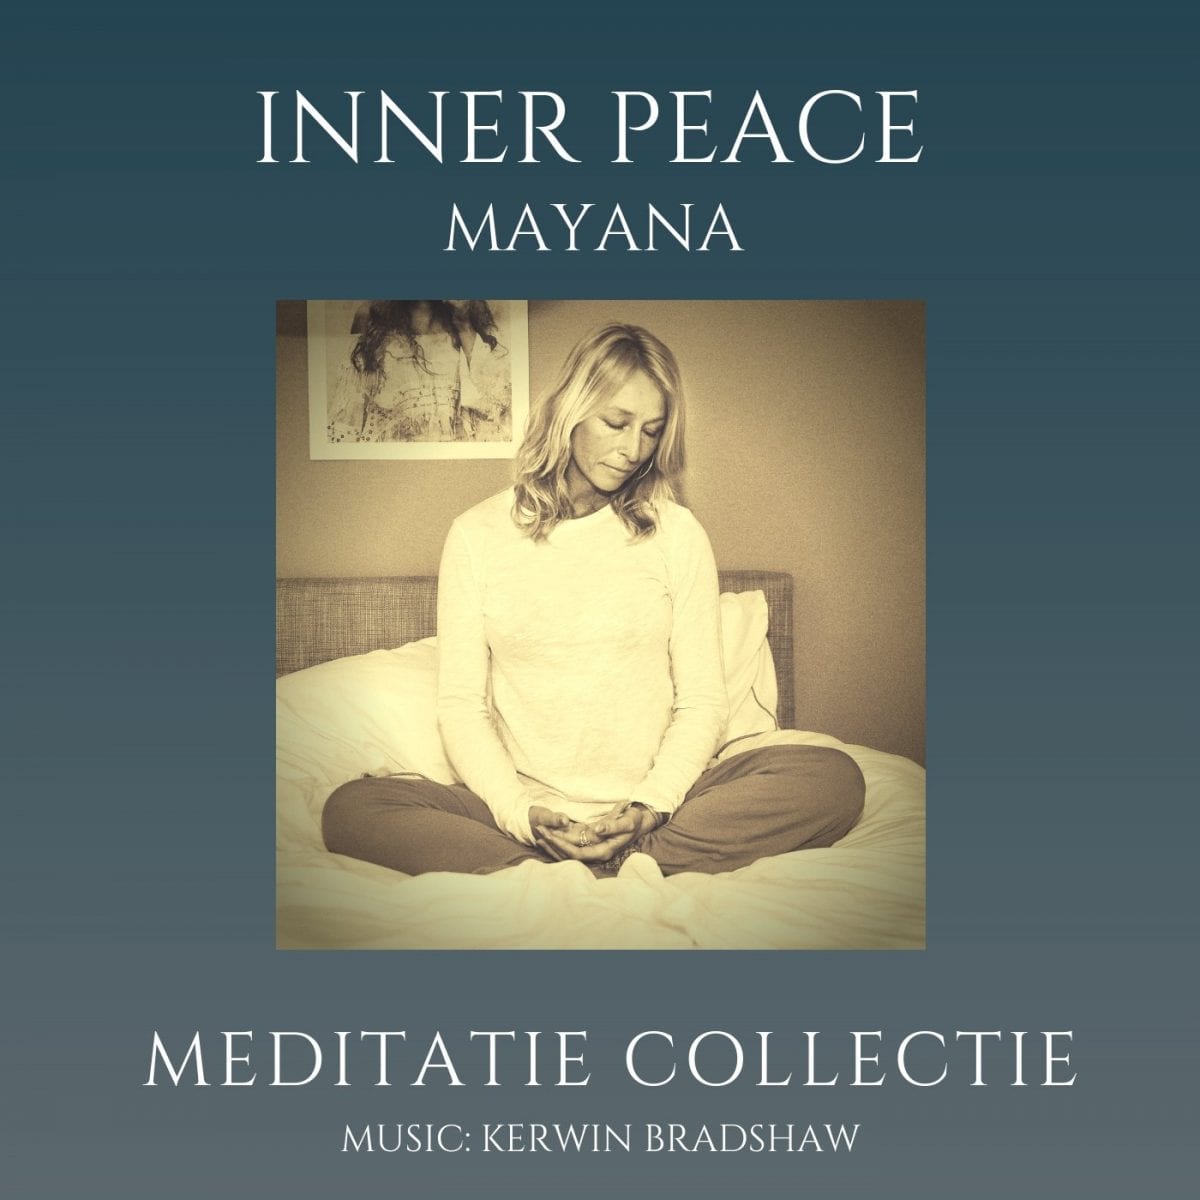 Inner peace-Meditation Collection - Mayana